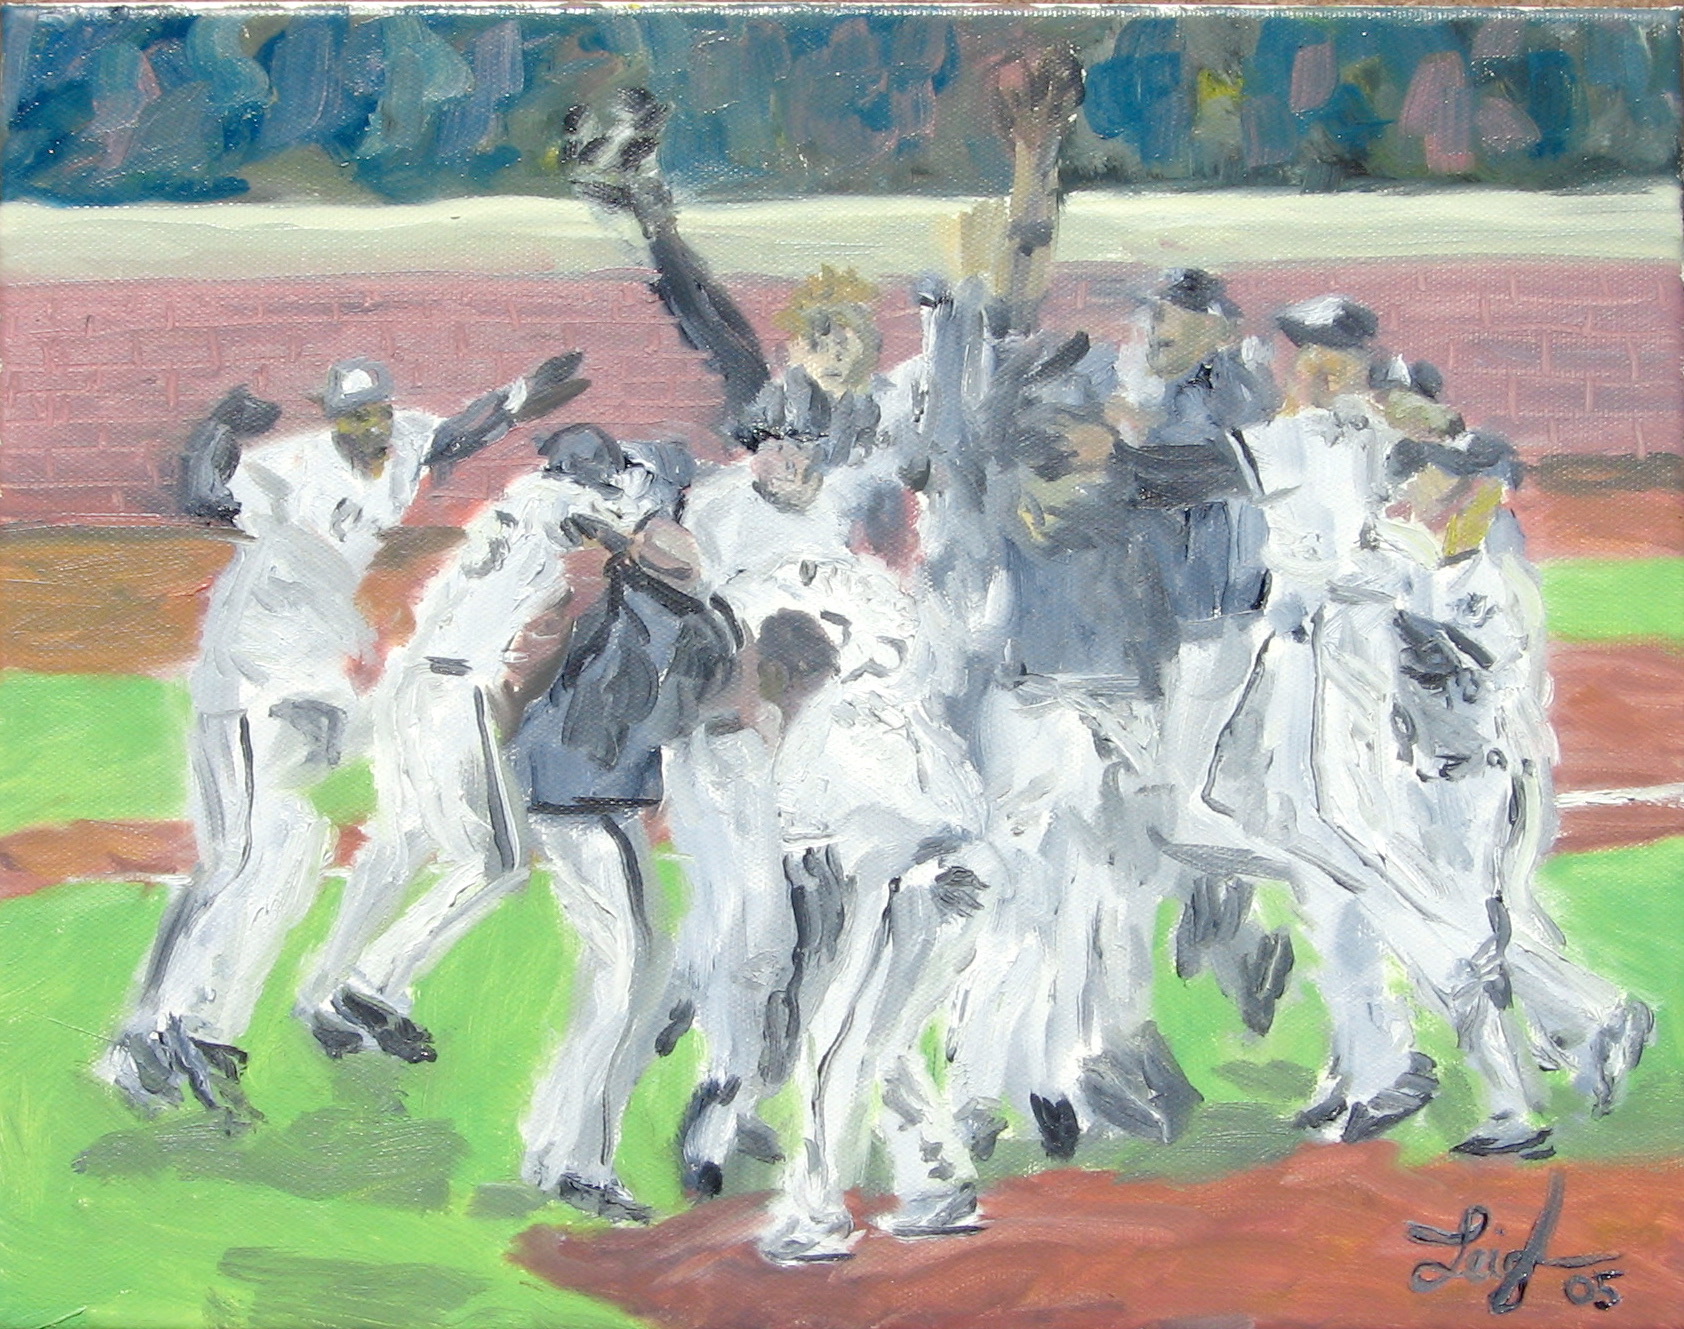 The White Sox Win the World Series  ~  
2005  •  14 x 11